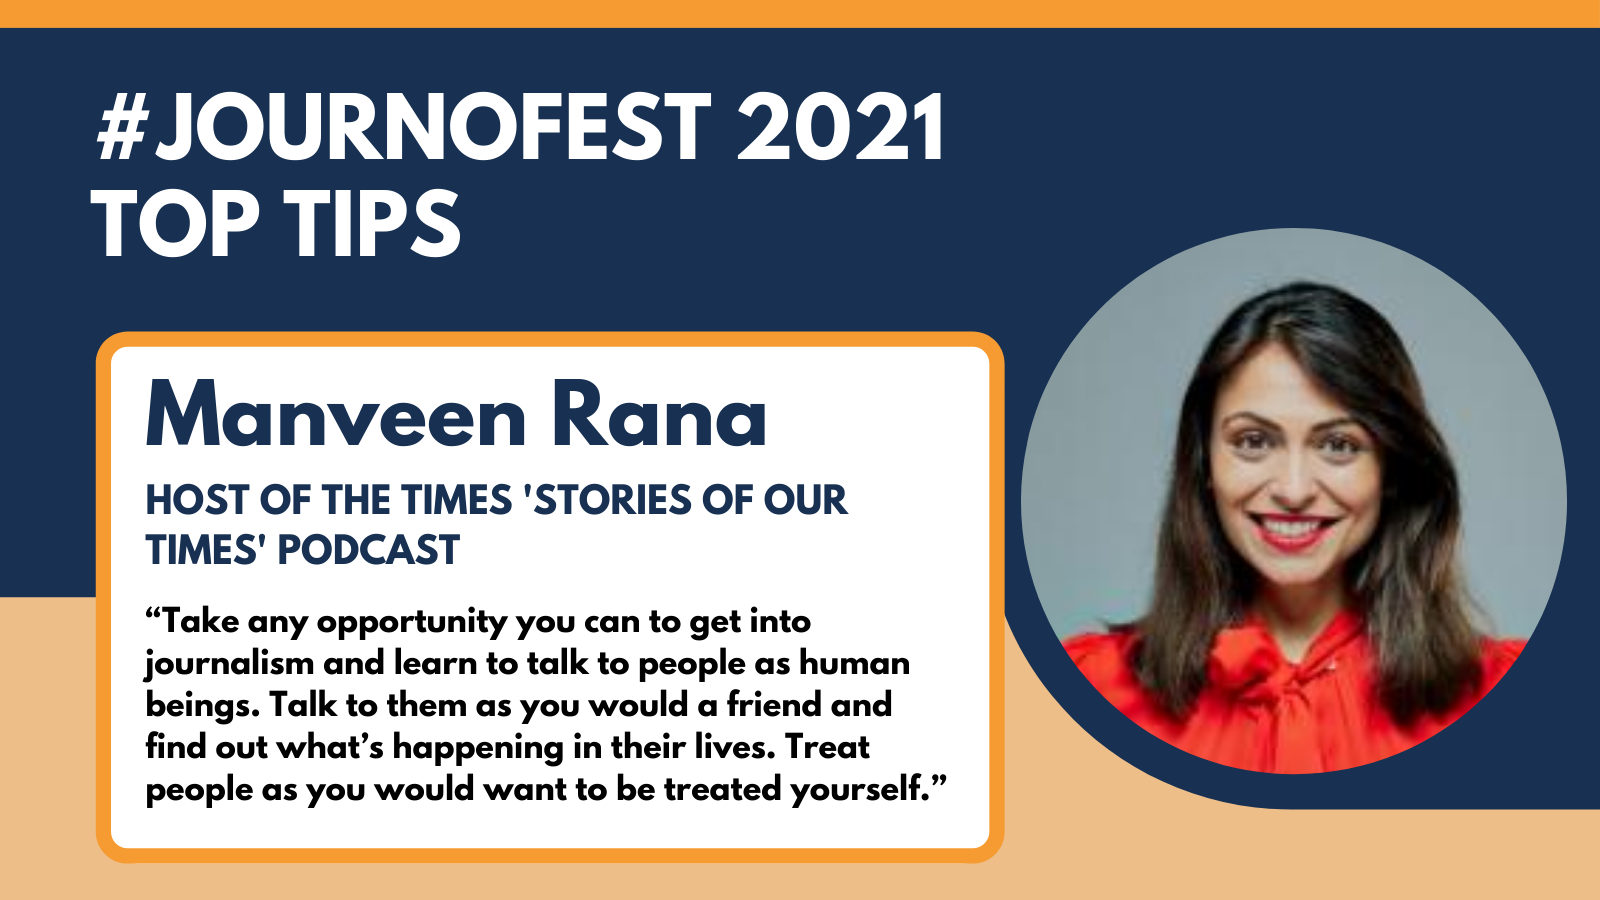 How to uncover the truth with Manveen Rana